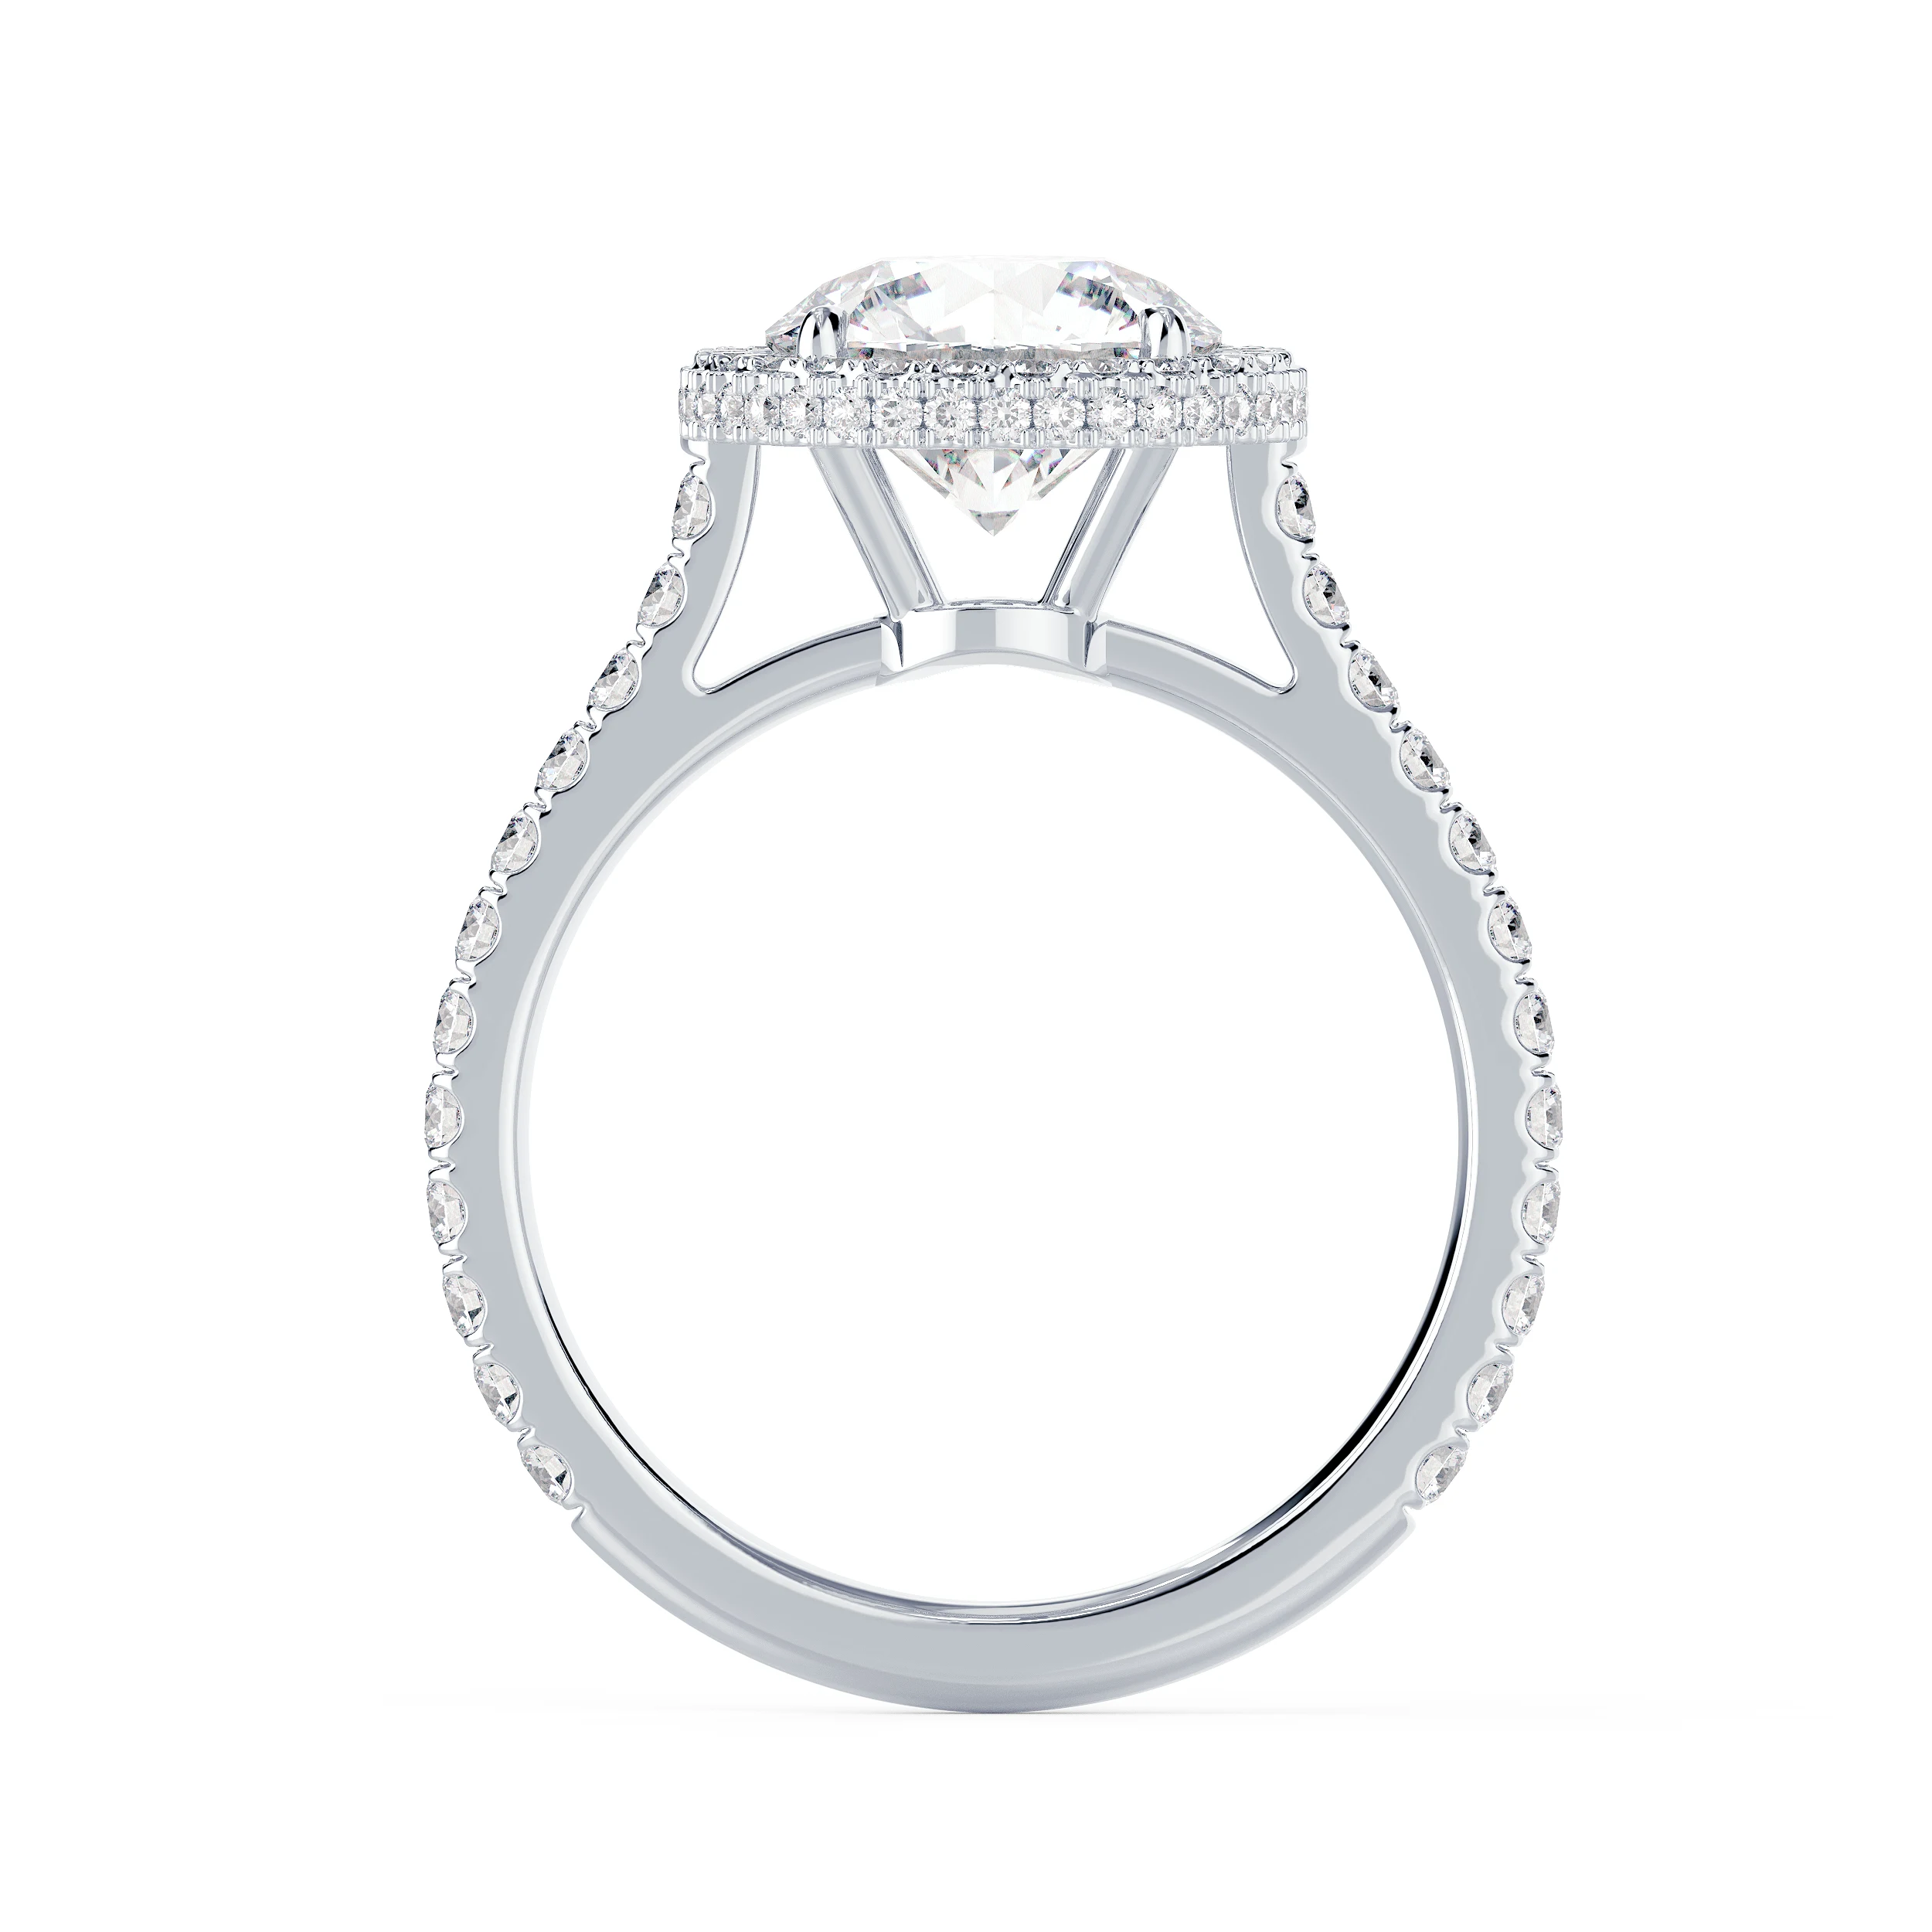 High Quality Man Made Diamonds set in White Gold Double Sided Halo Setting (Profile View)